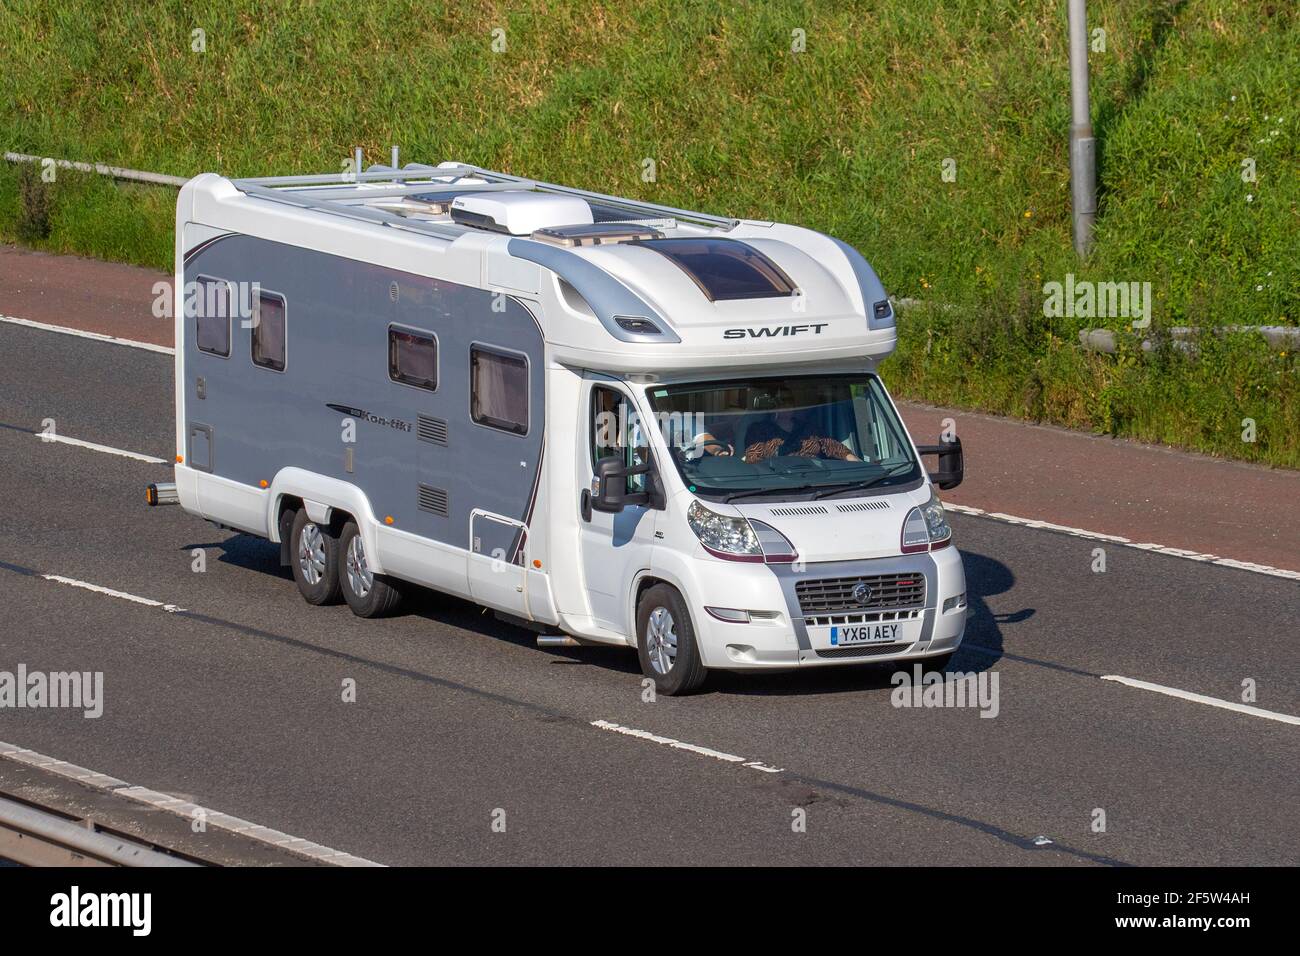 land Sceptisch tand 2011 Fiat Ducato 40 Max 160 M-Jet Motorhome 2999cc diesel; Motorhomes,  campervans on Britain's roads, RV leisure vehicle, family holidays,  caravanette vacations, Touring caravan holiday, UK Stock Photo - Alamy